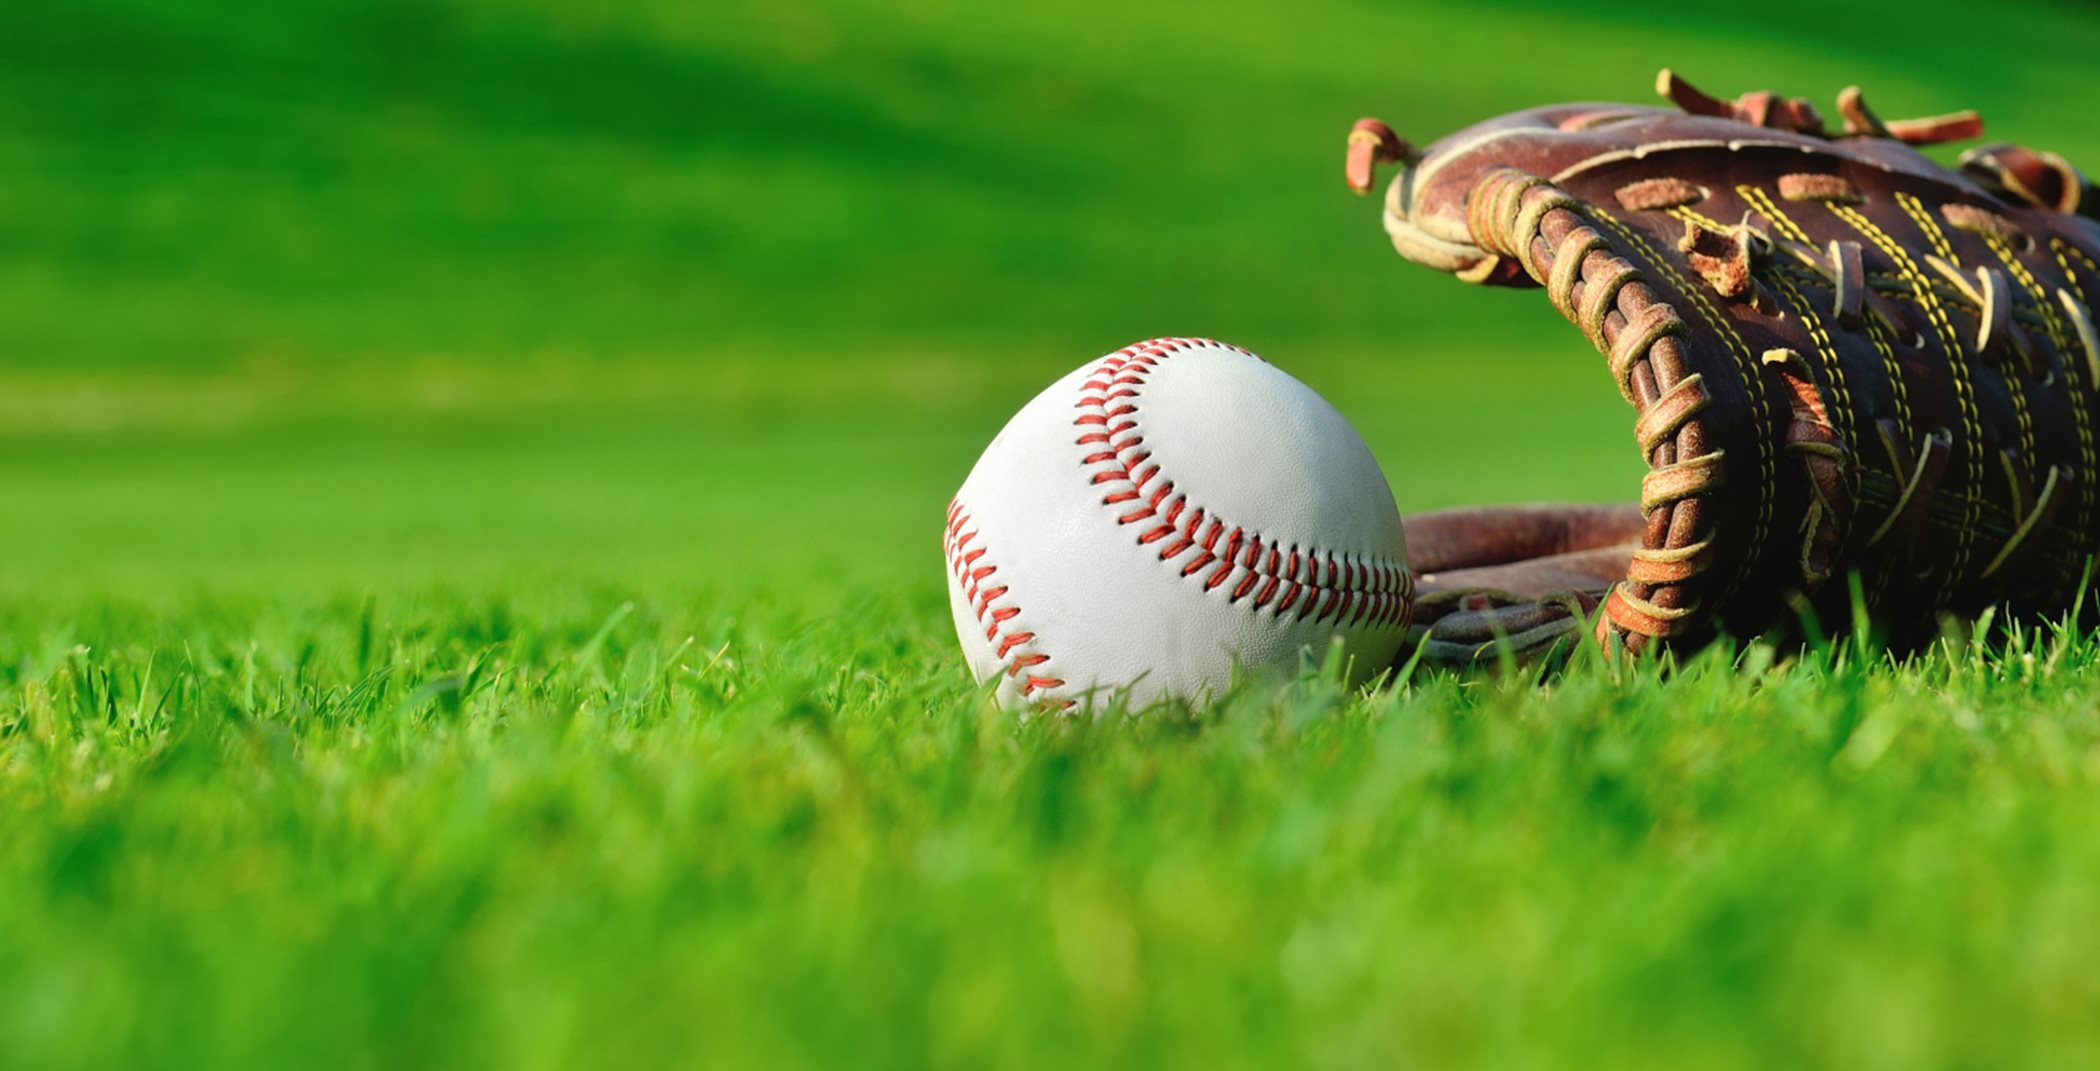 Baseball and Glove lying in grass